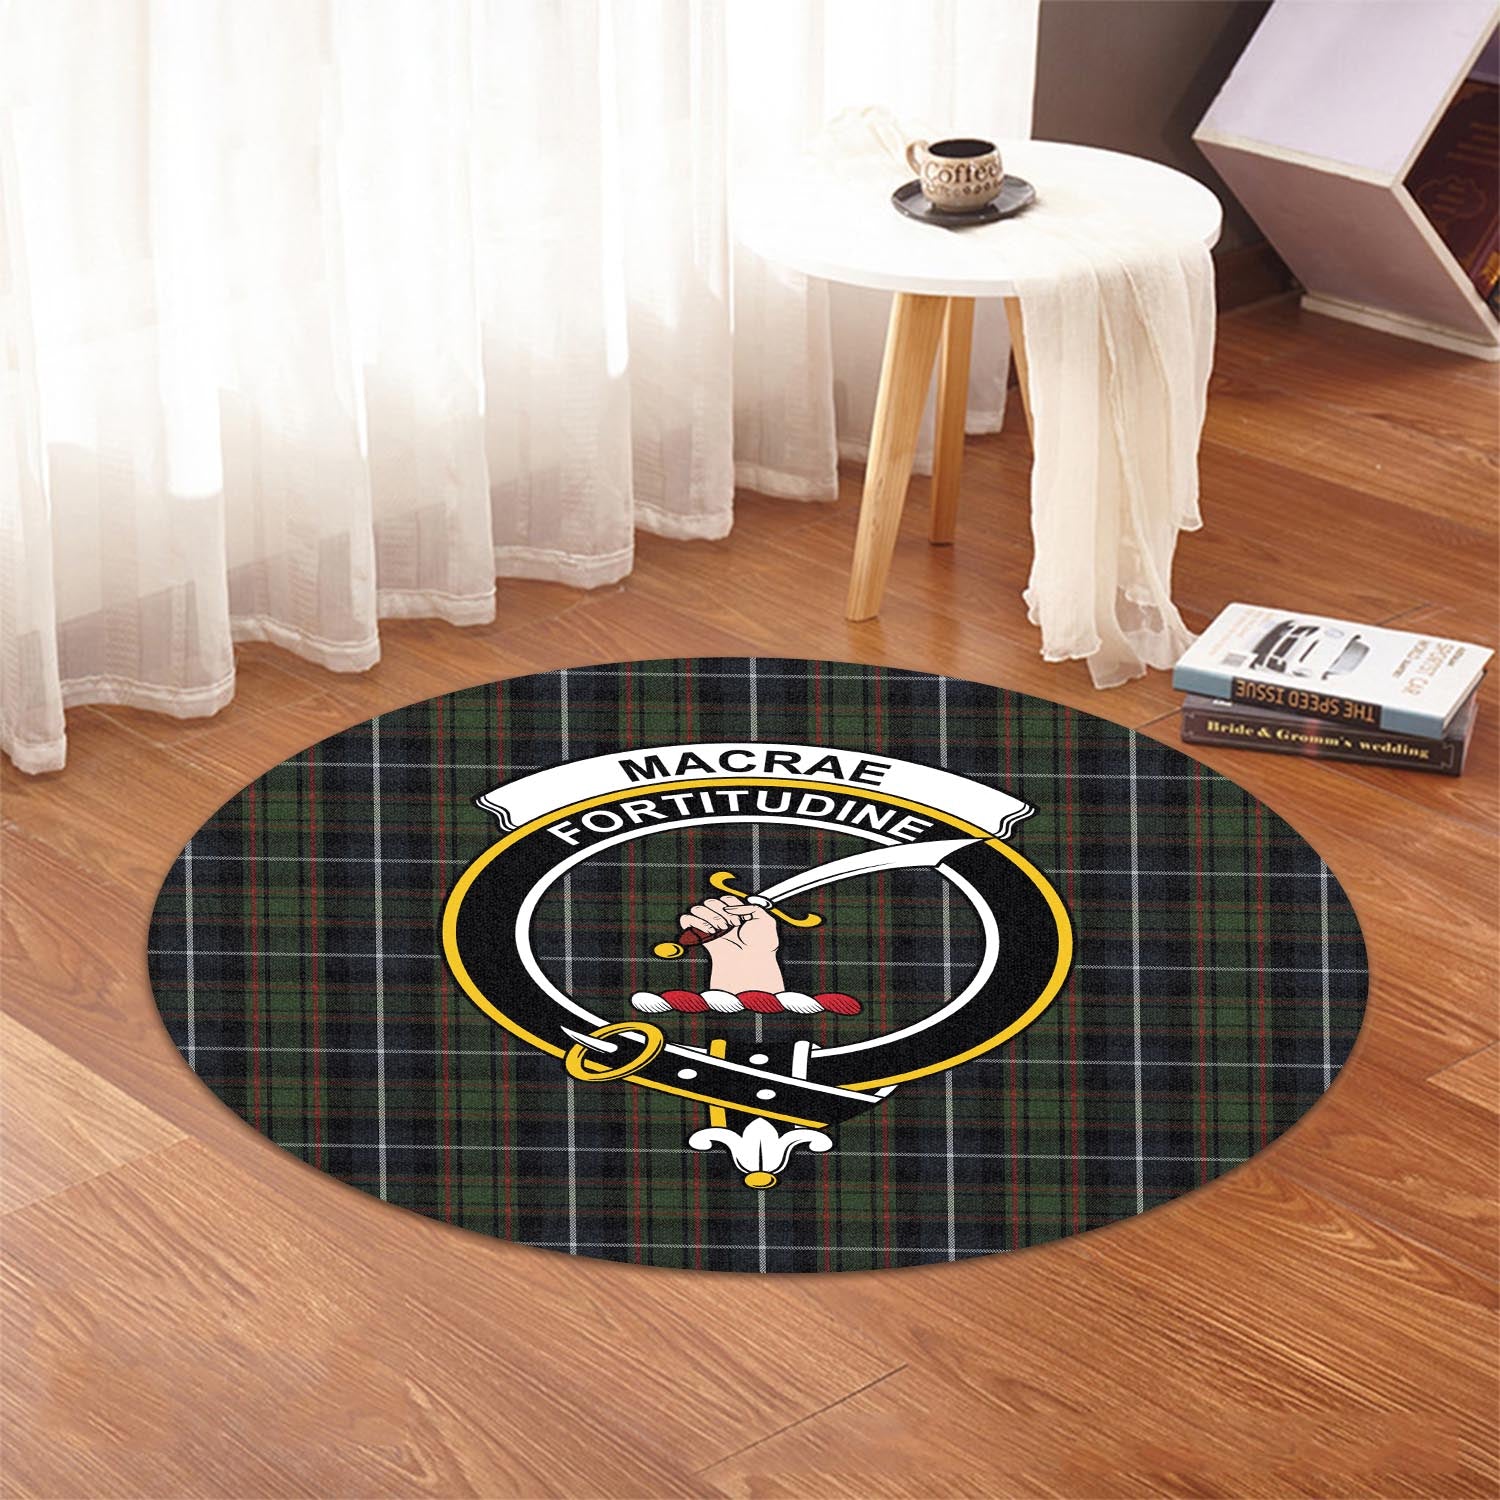 macrae-hunting-tartan-round-rug-with-family-crest